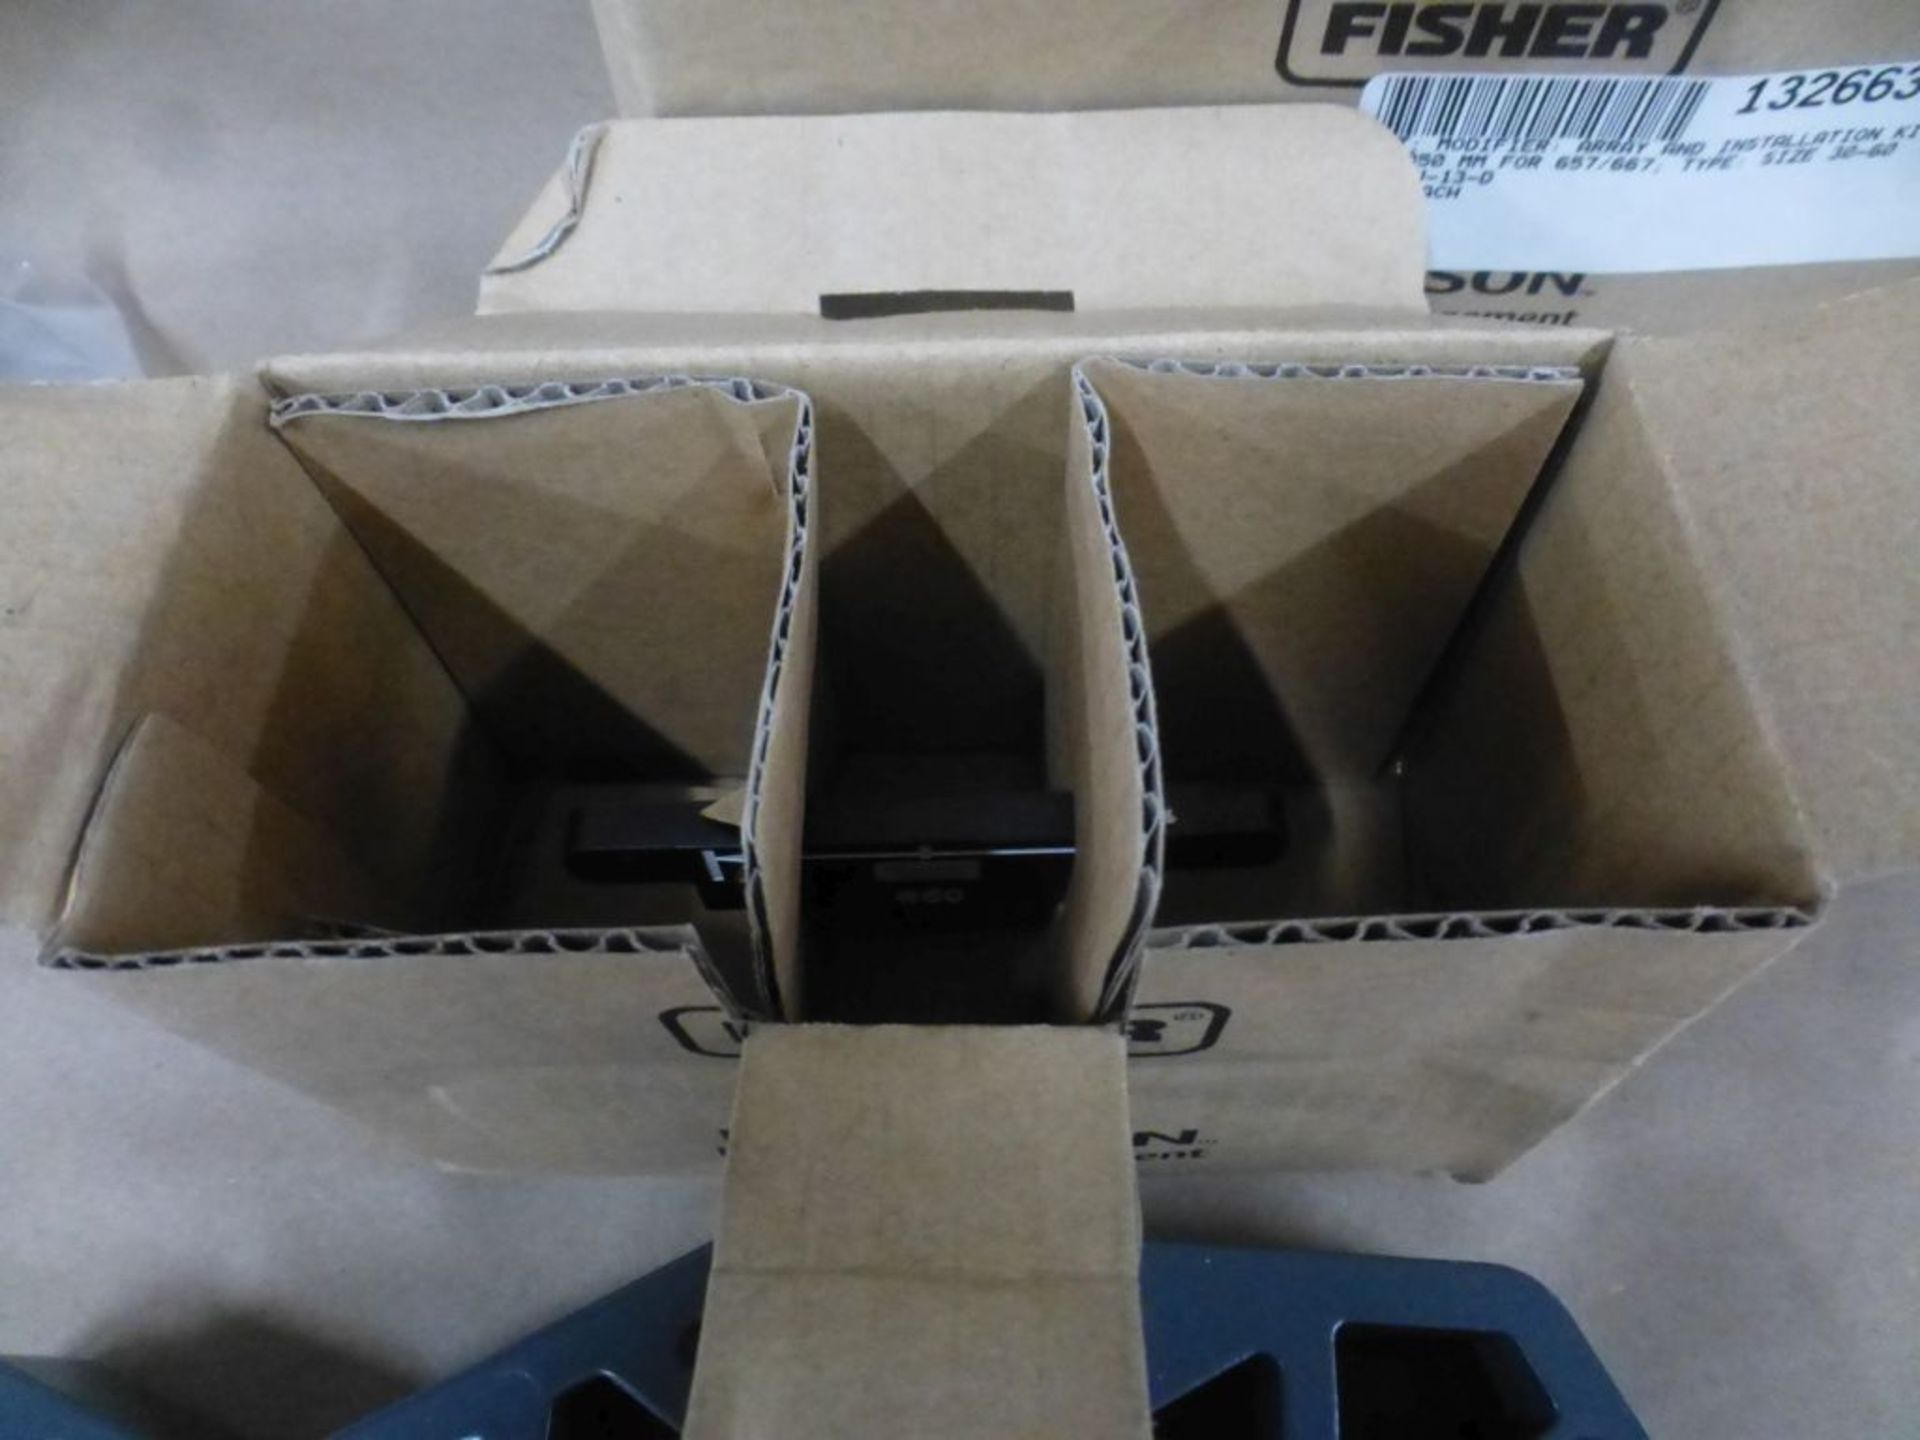 Lot of (7) Fisher Modifier Array & Installation Kits|Part No. GG03708X032|Lot Loading Fee: $5.00 - Image 8 of 20